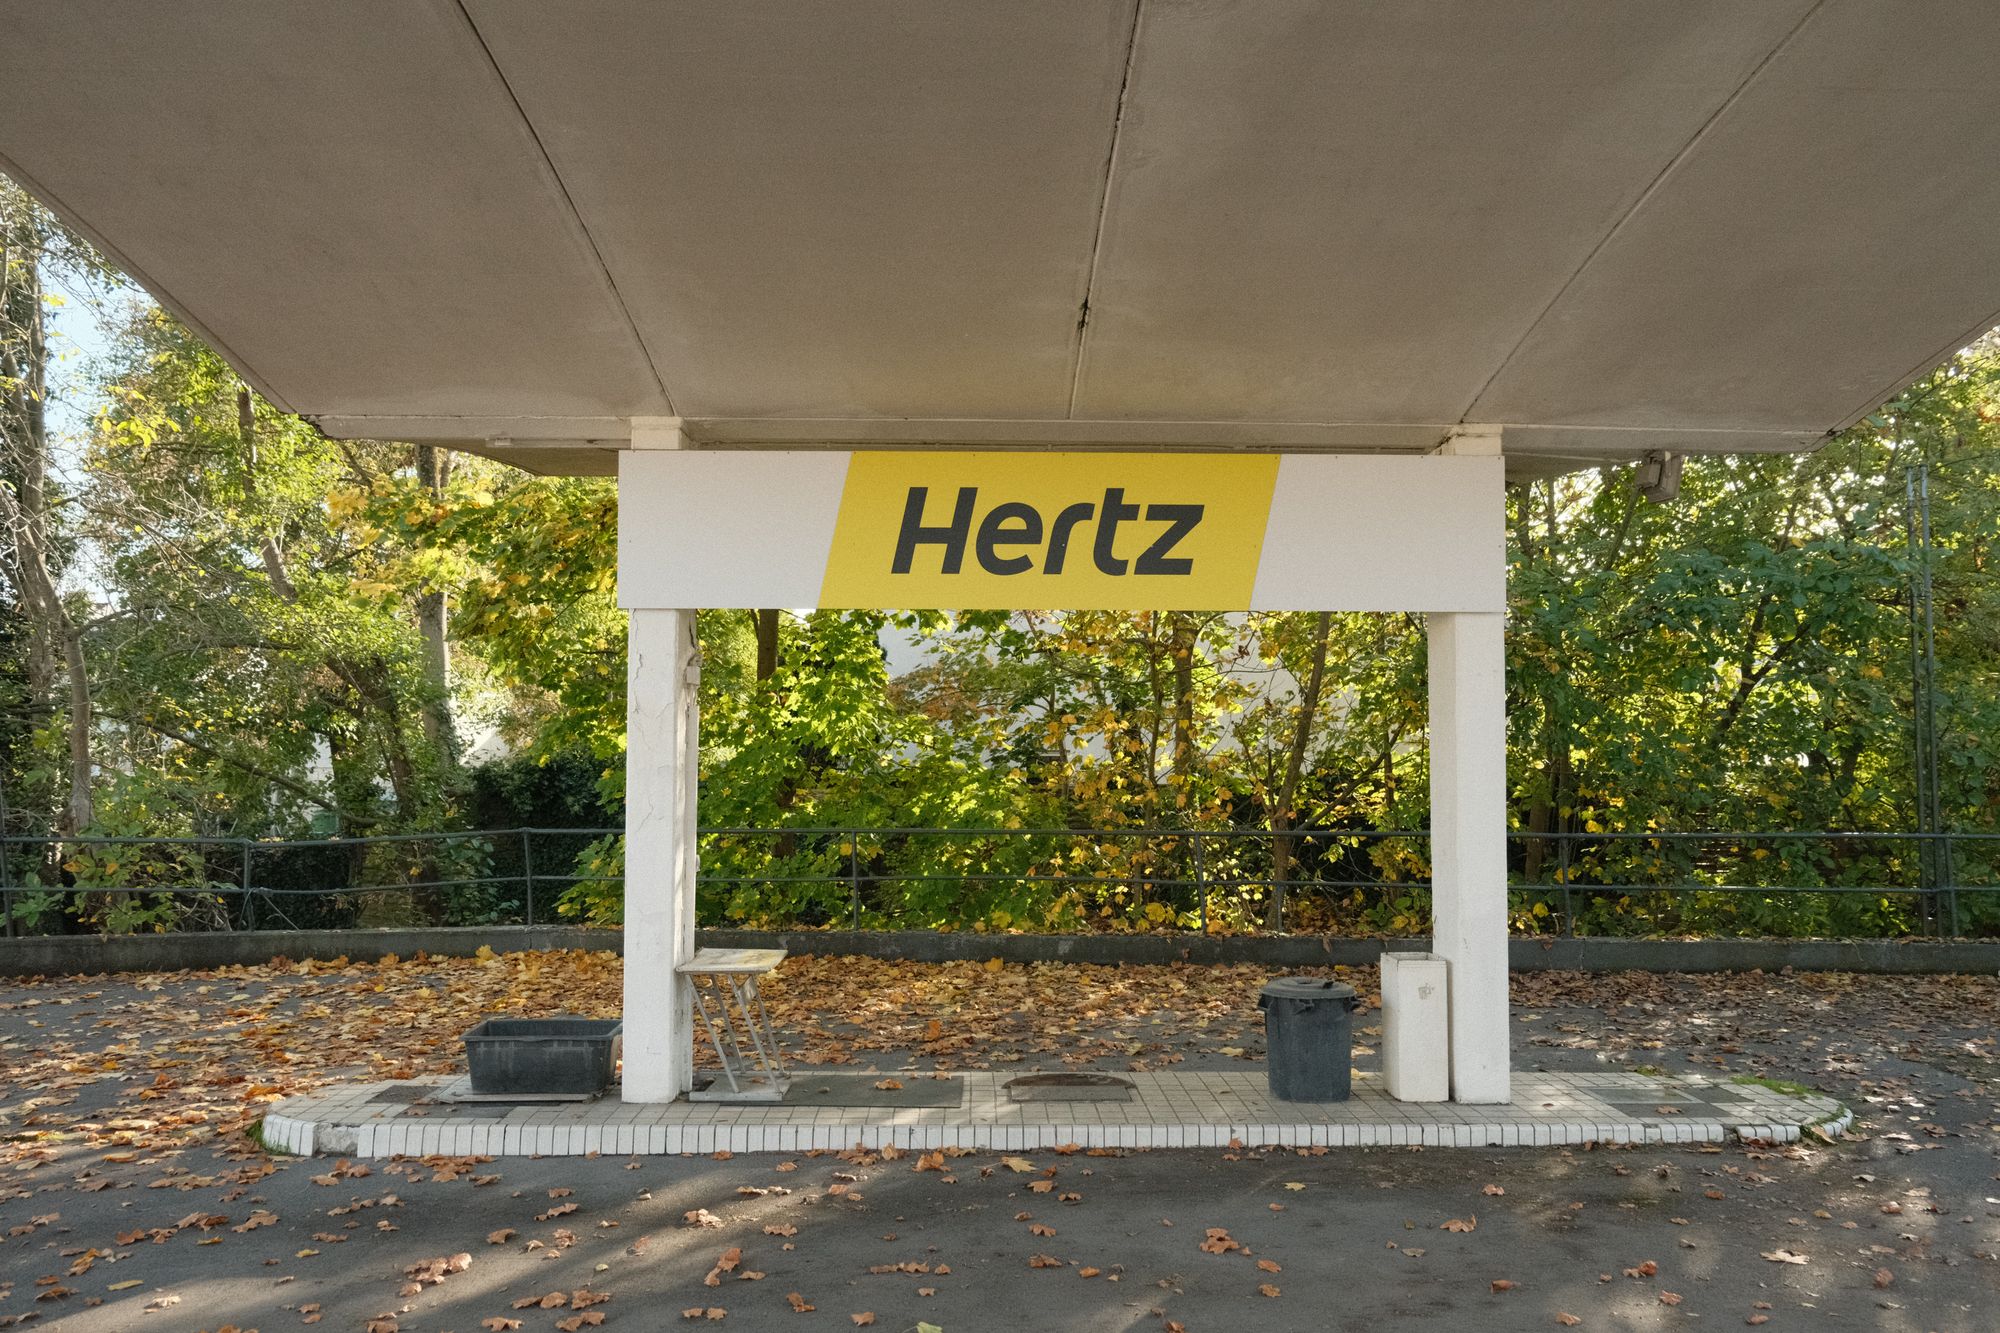                      Why It Hurts to Rent With Hertz                             
                     